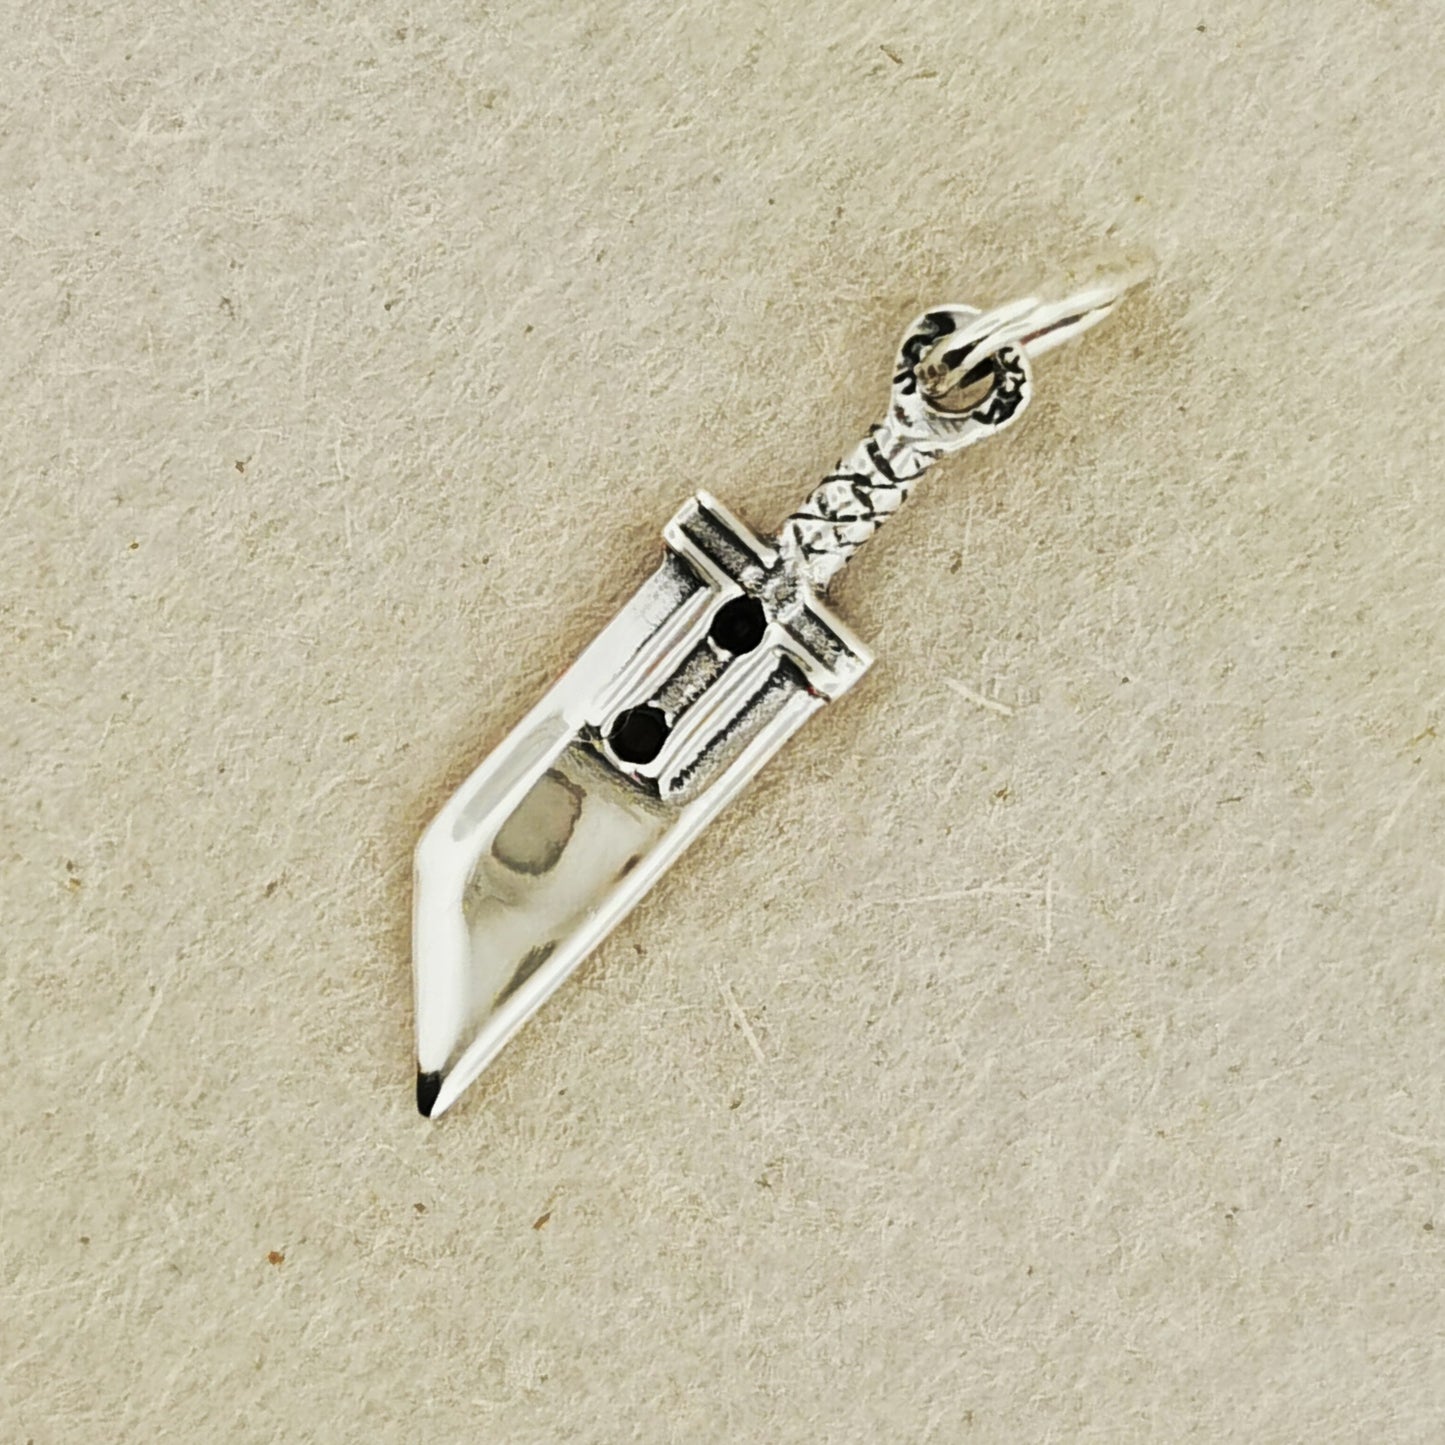 FF7 Small Buster Sword Charm in Sterling Silver or Antique Bronze, FFVII Sword Charm, FF7 Cloud Strife Sword Pendant, FFVII Buster Sword, Buster Sword Pendant, Gamer Girl Jewelry, Final Fantasy Jewelry, Final Fantasy Cloud Charm, Buster Sword Charm